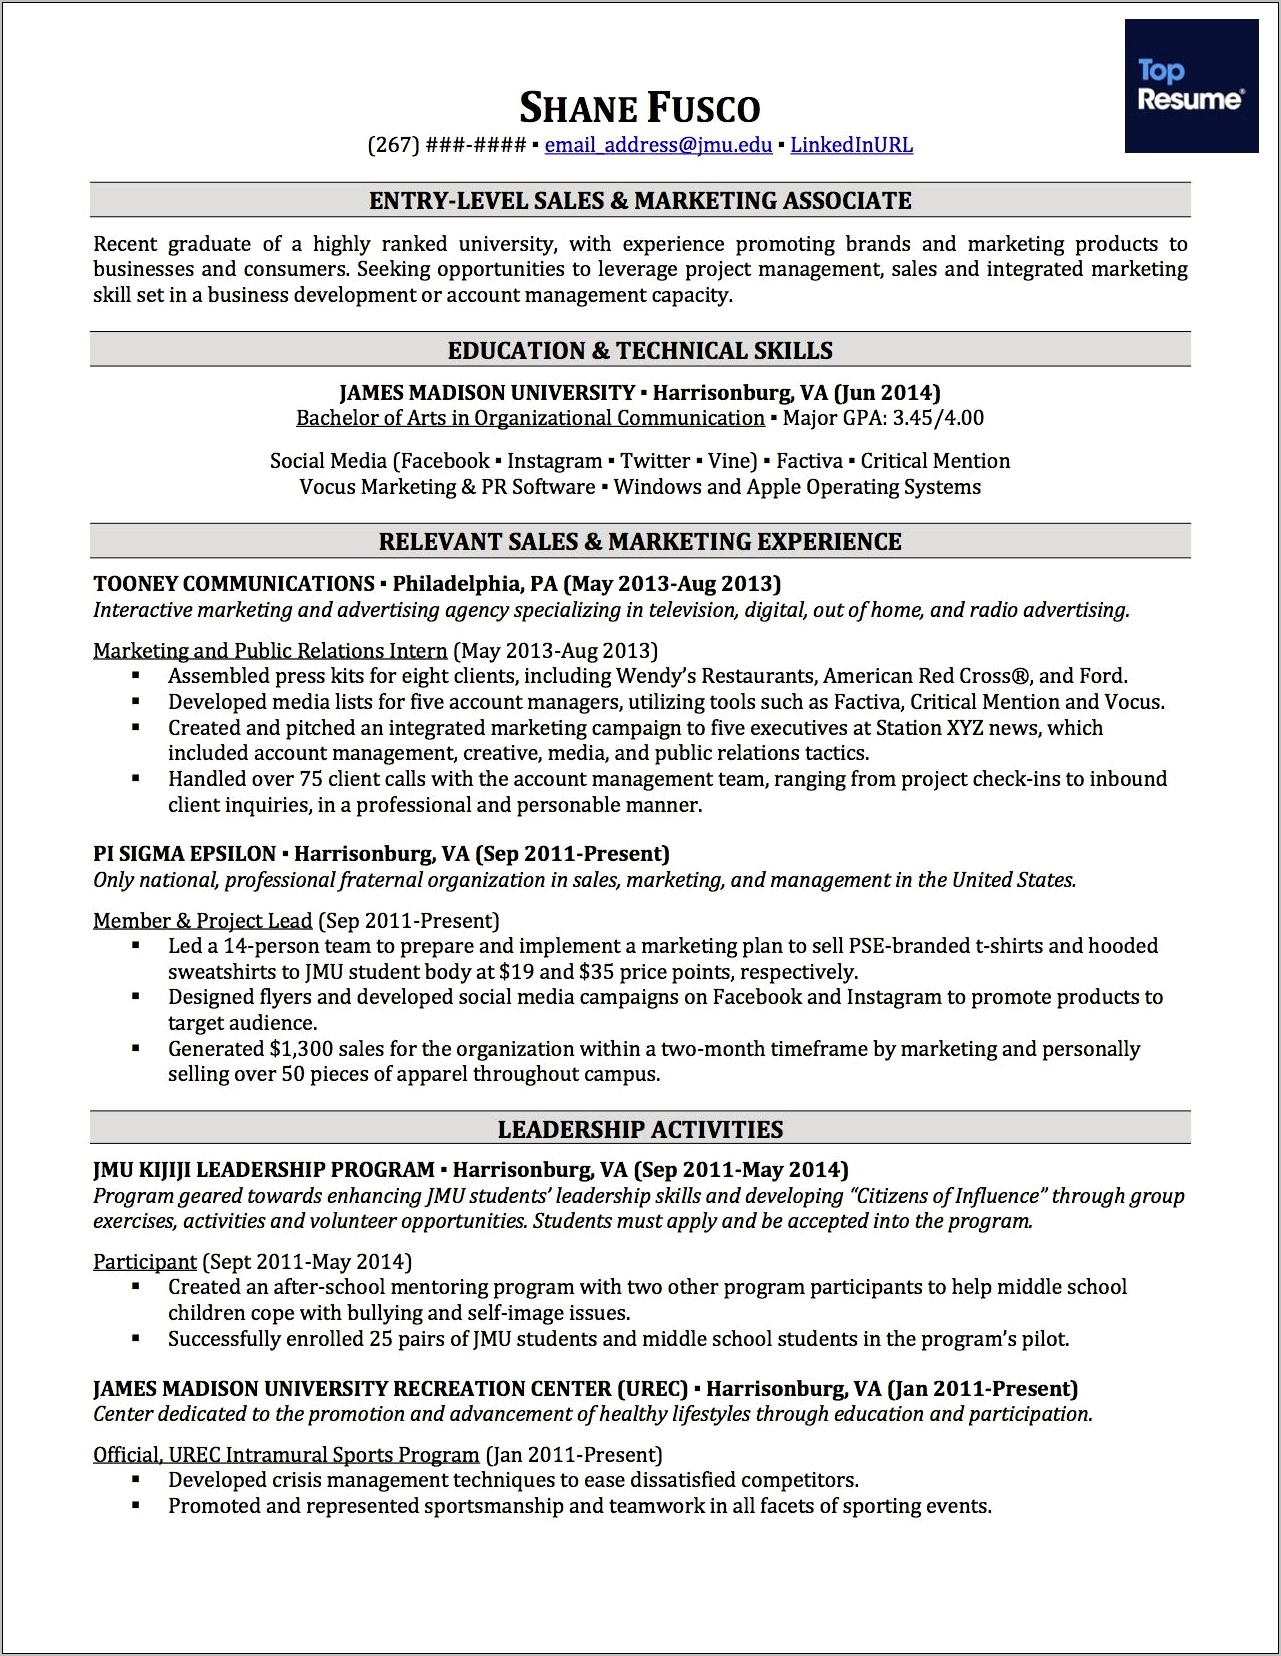 Resume Objective Statement For Education Jobs